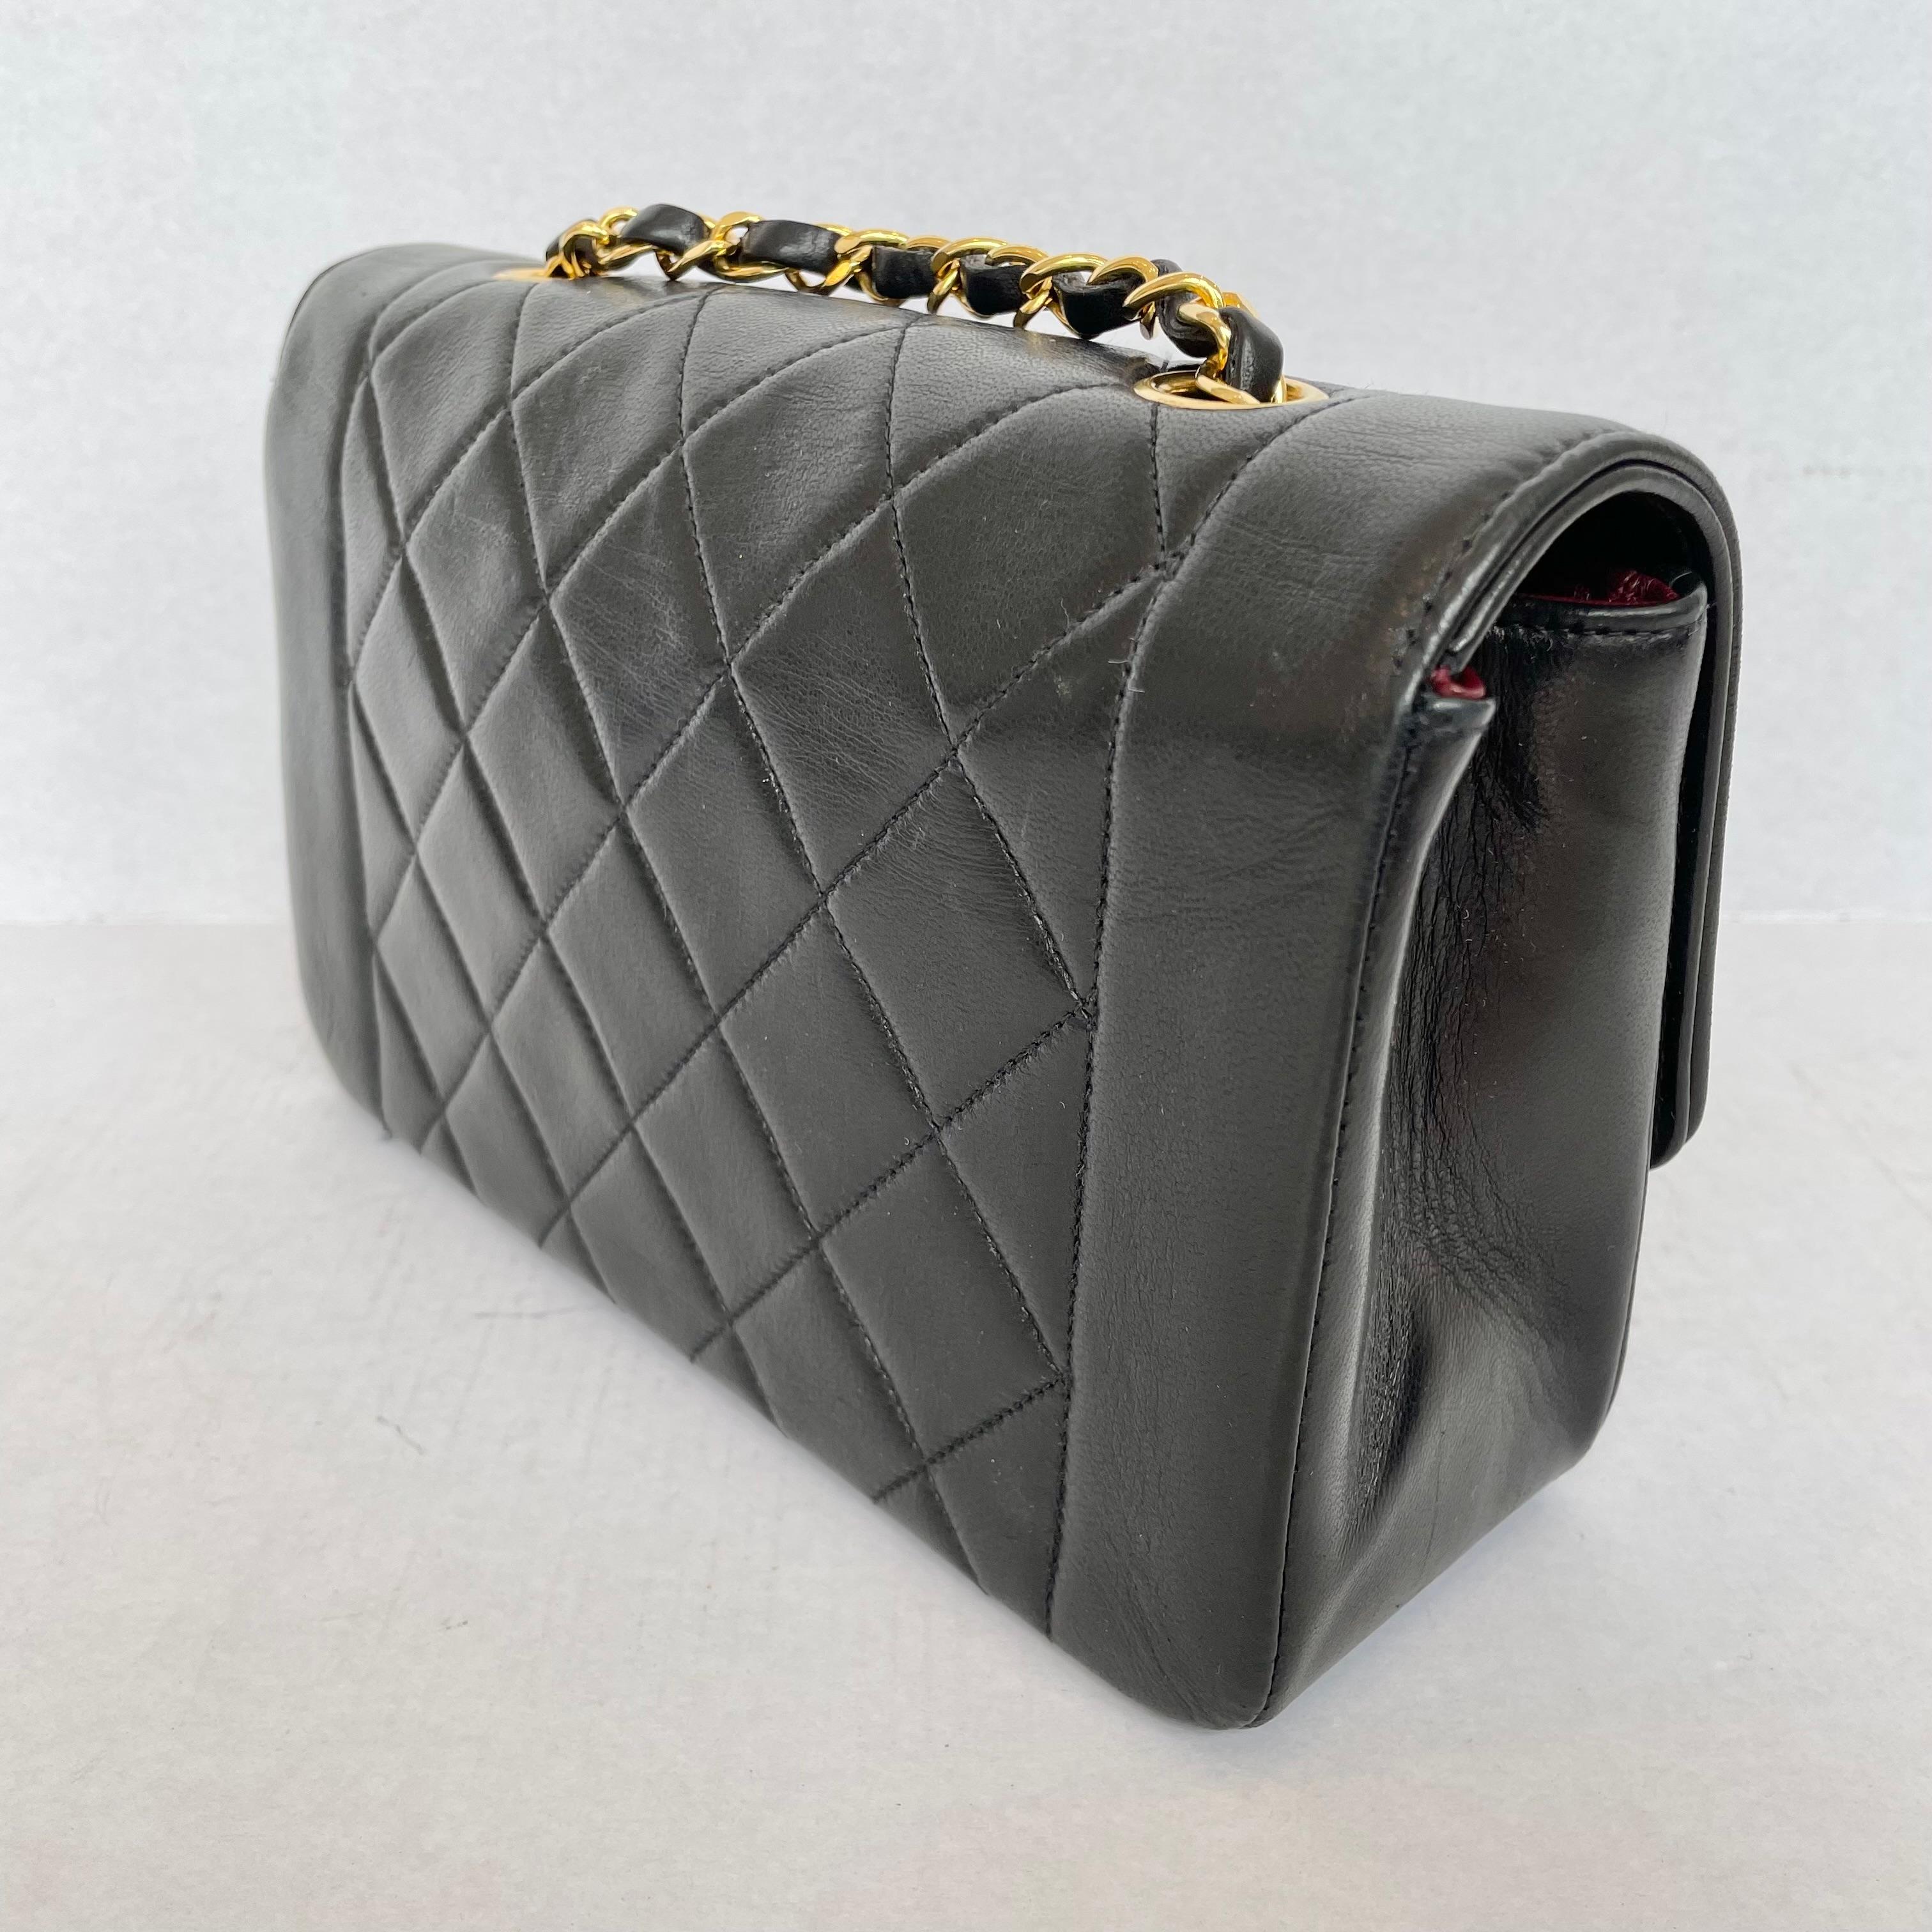 Late 20th Century Rare Chanel Diana Shoulder Bag Black Quilted Lambskin Leather, 1990s France For Sale